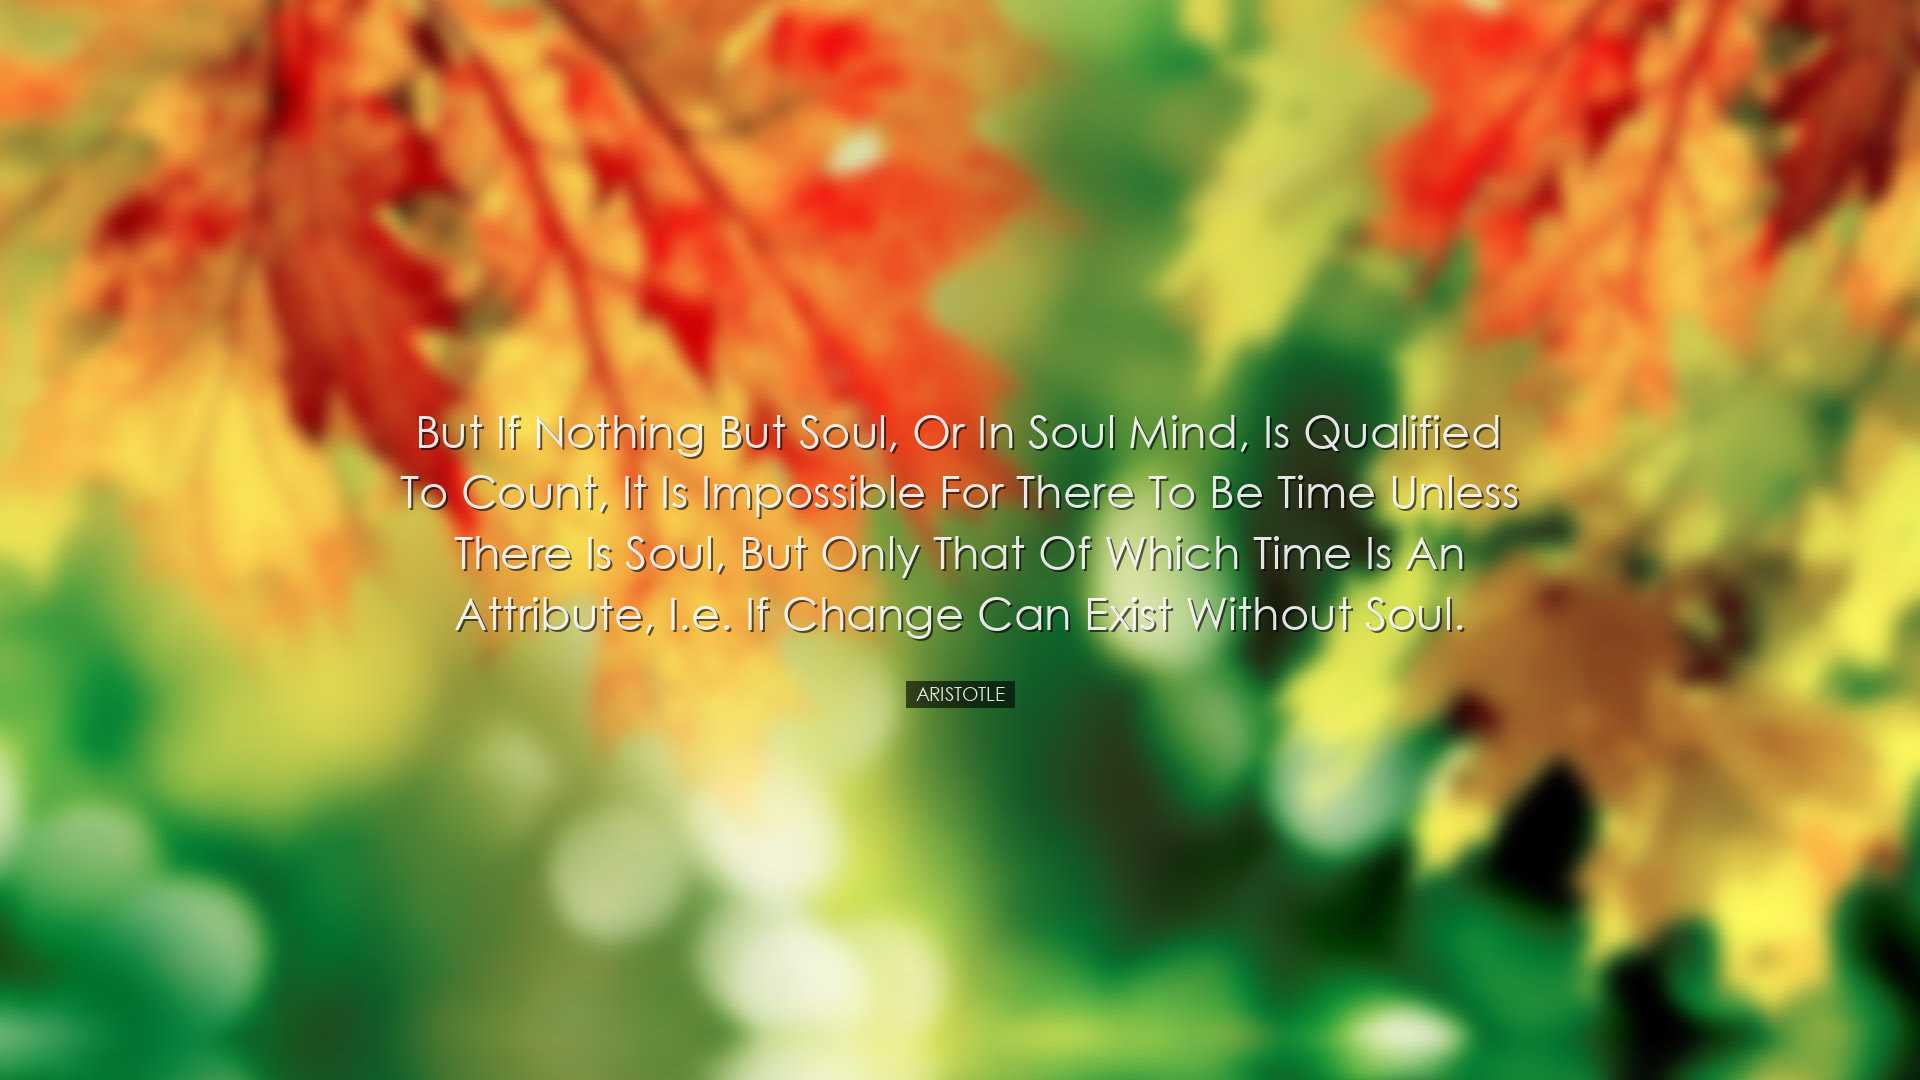 But if nothing but soul, or in soul mind, is qualified to count, i